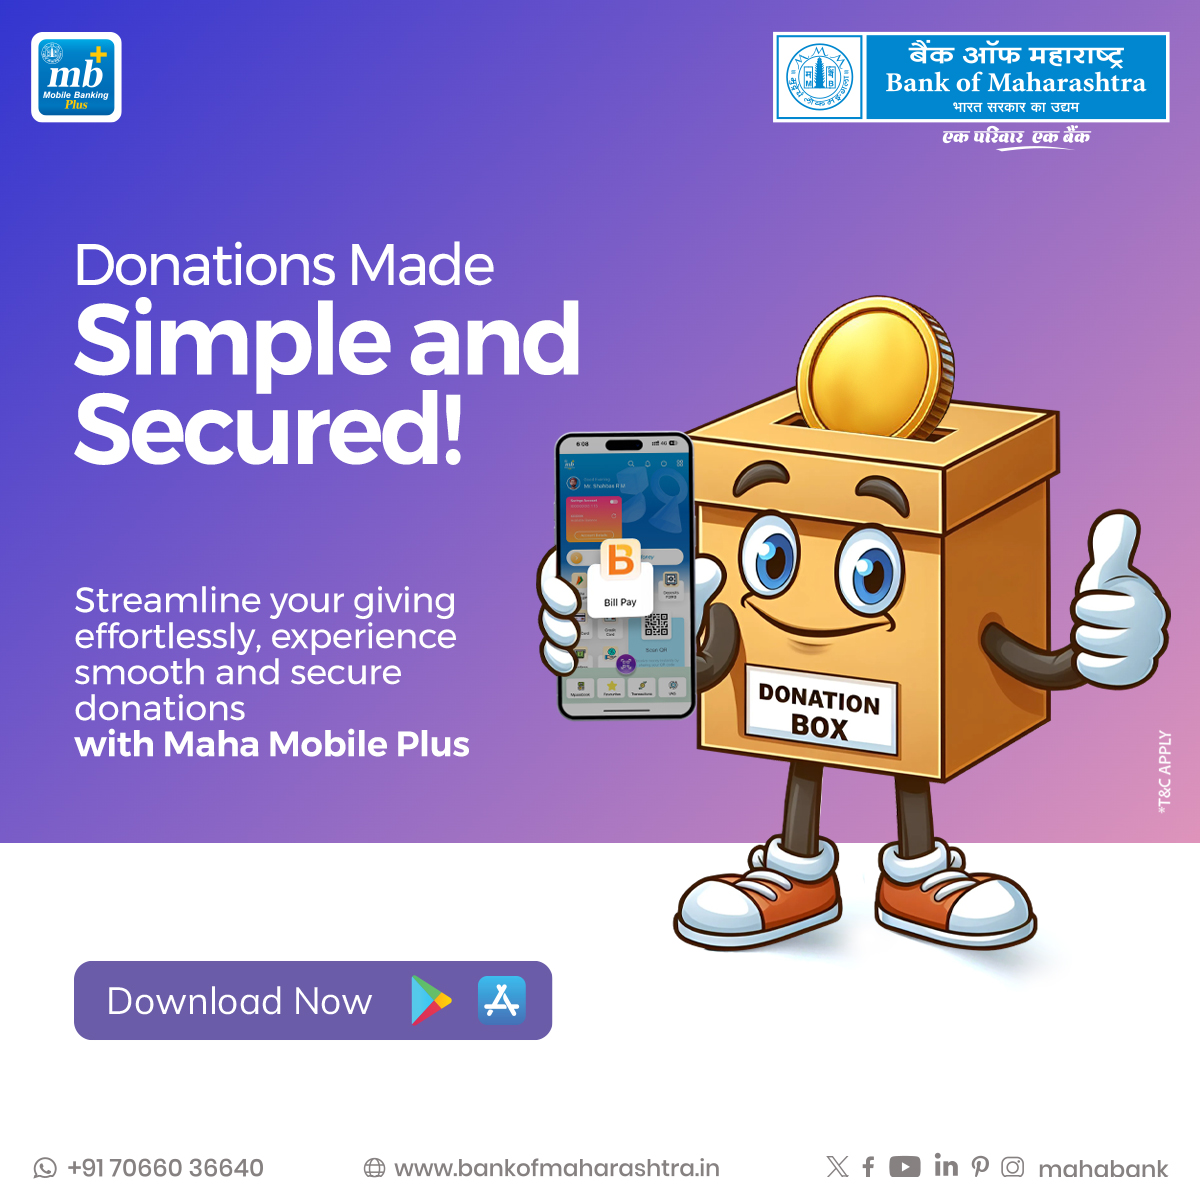 Transform your act of giving with Maha Mobile Plus! Experience the simplicity of secure donations and contribute to causes close to your heart. Download the Mahamobile Plus App now!

Download the App: bit.ly/41WsT4A

#BankofMaharashtra #Mahabank #DonationsMadeEasy